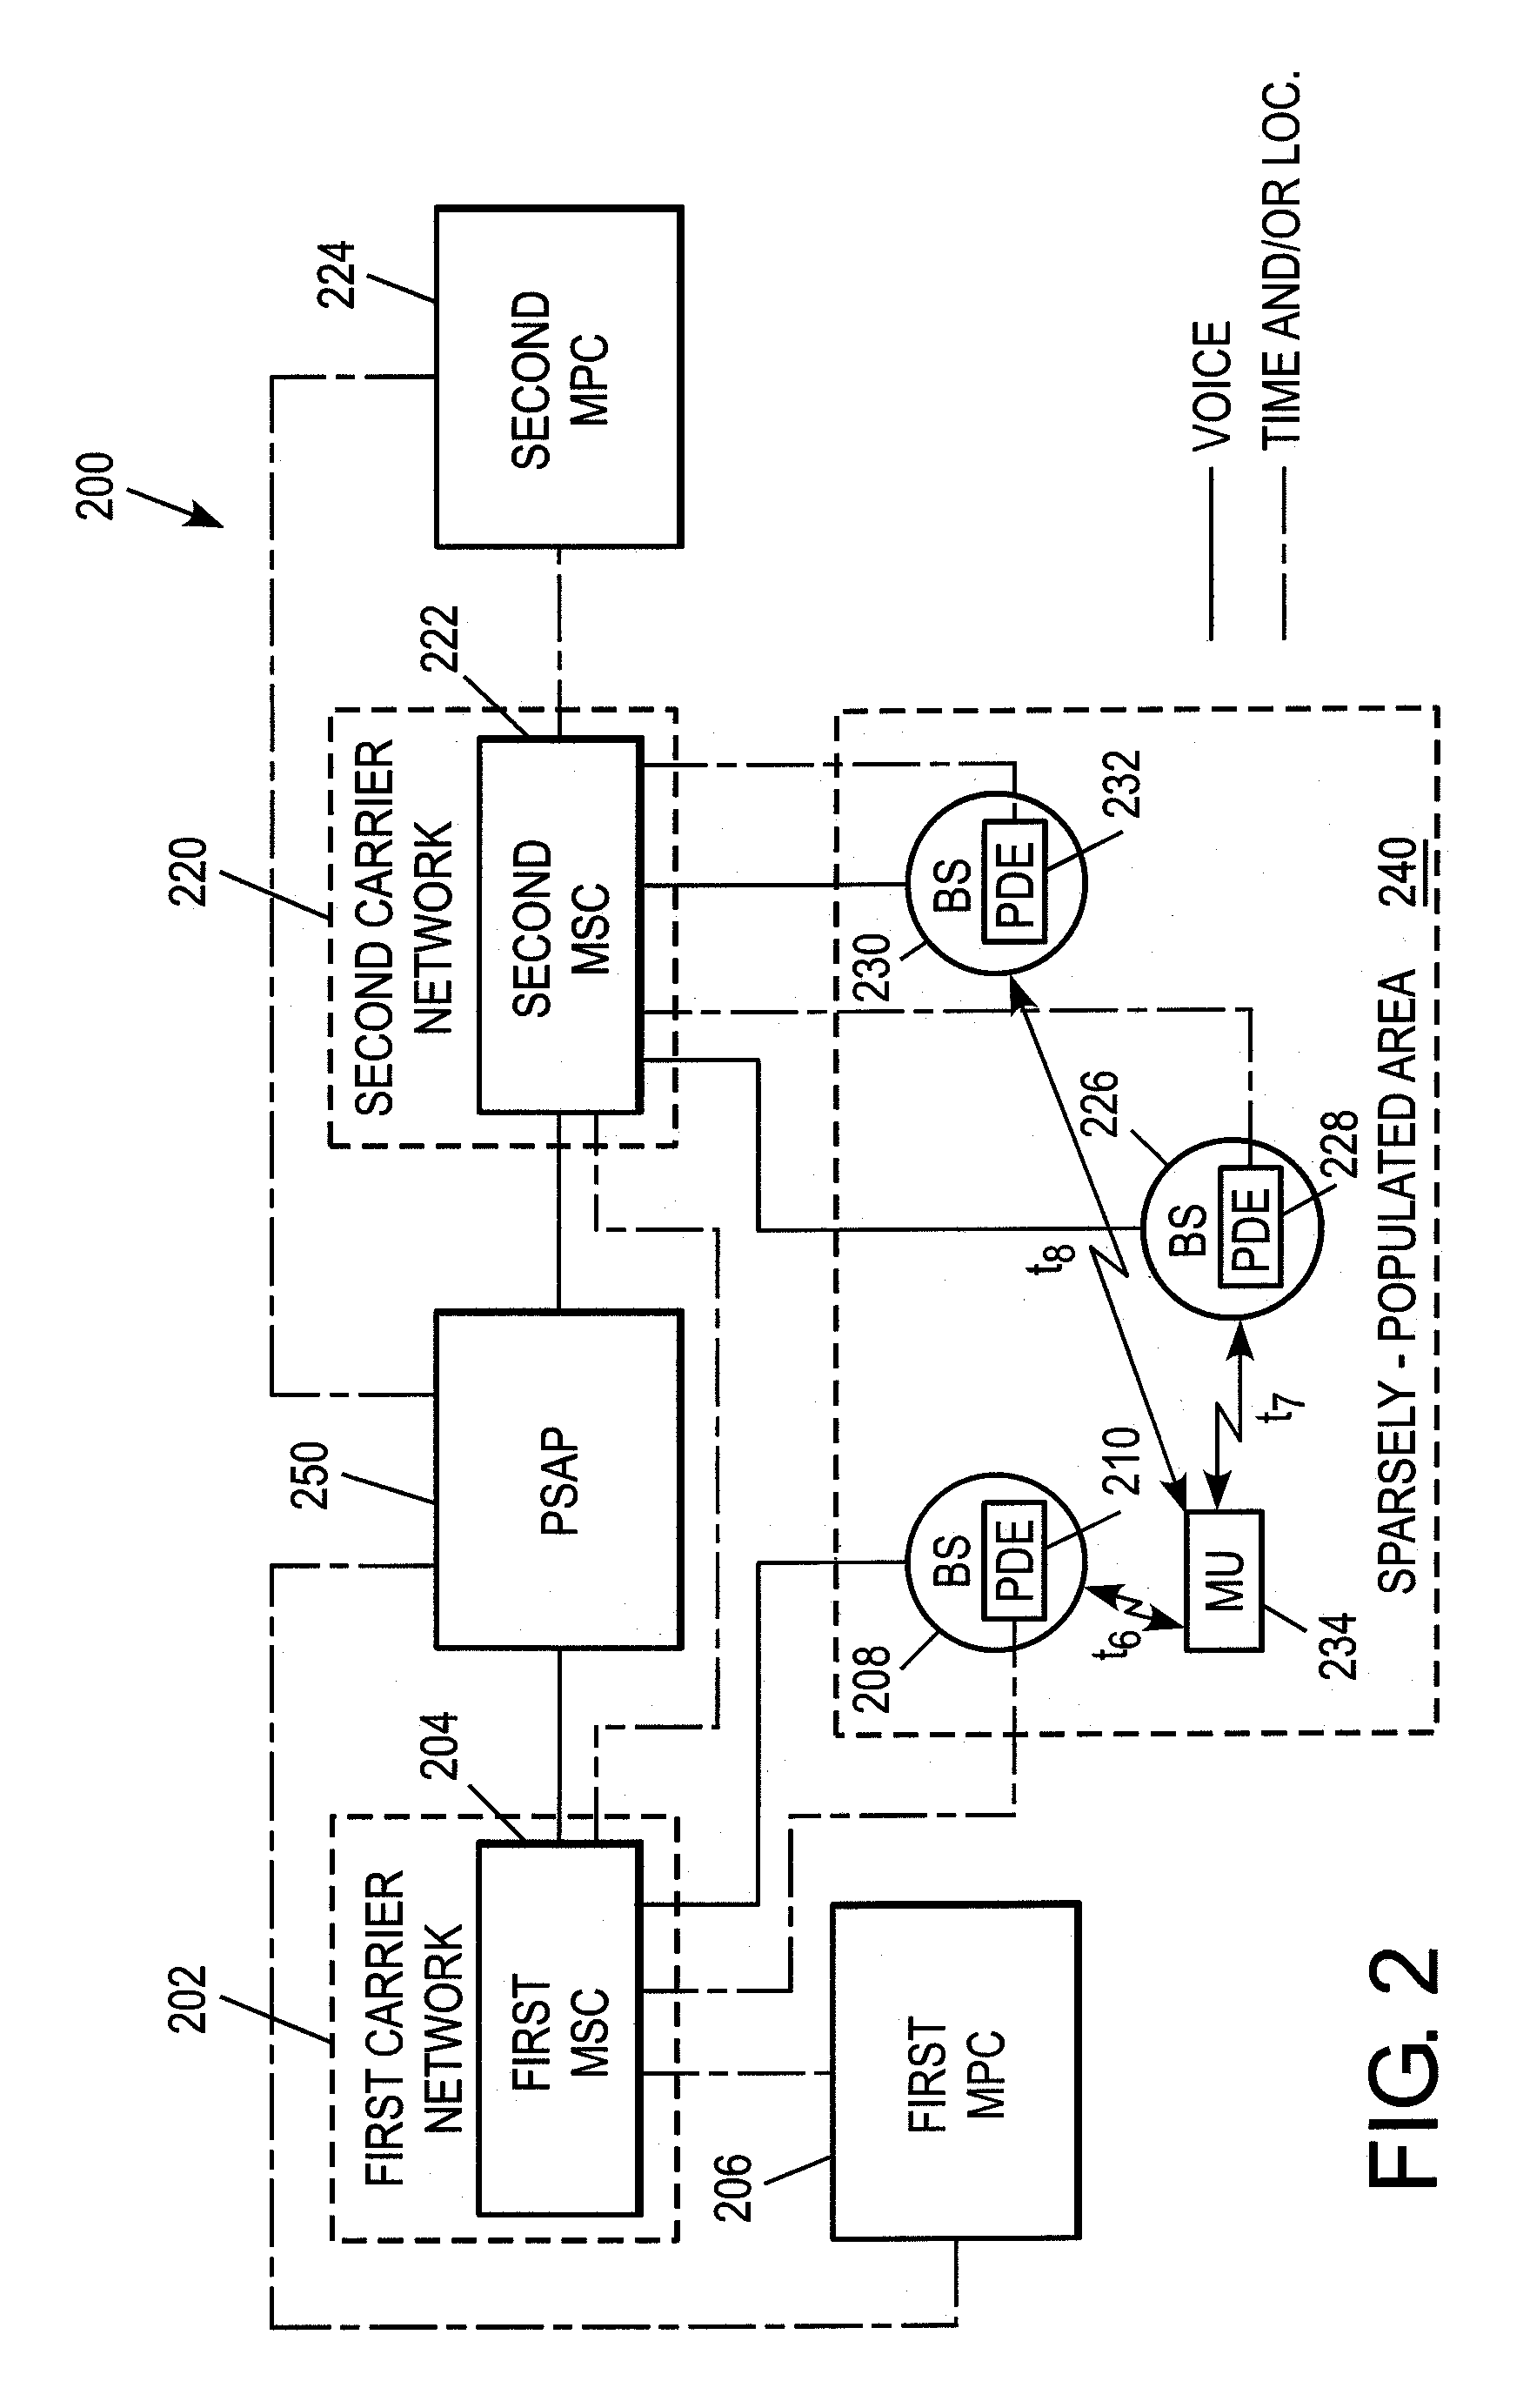 System and method for position equipment dusting in search and rescue operations